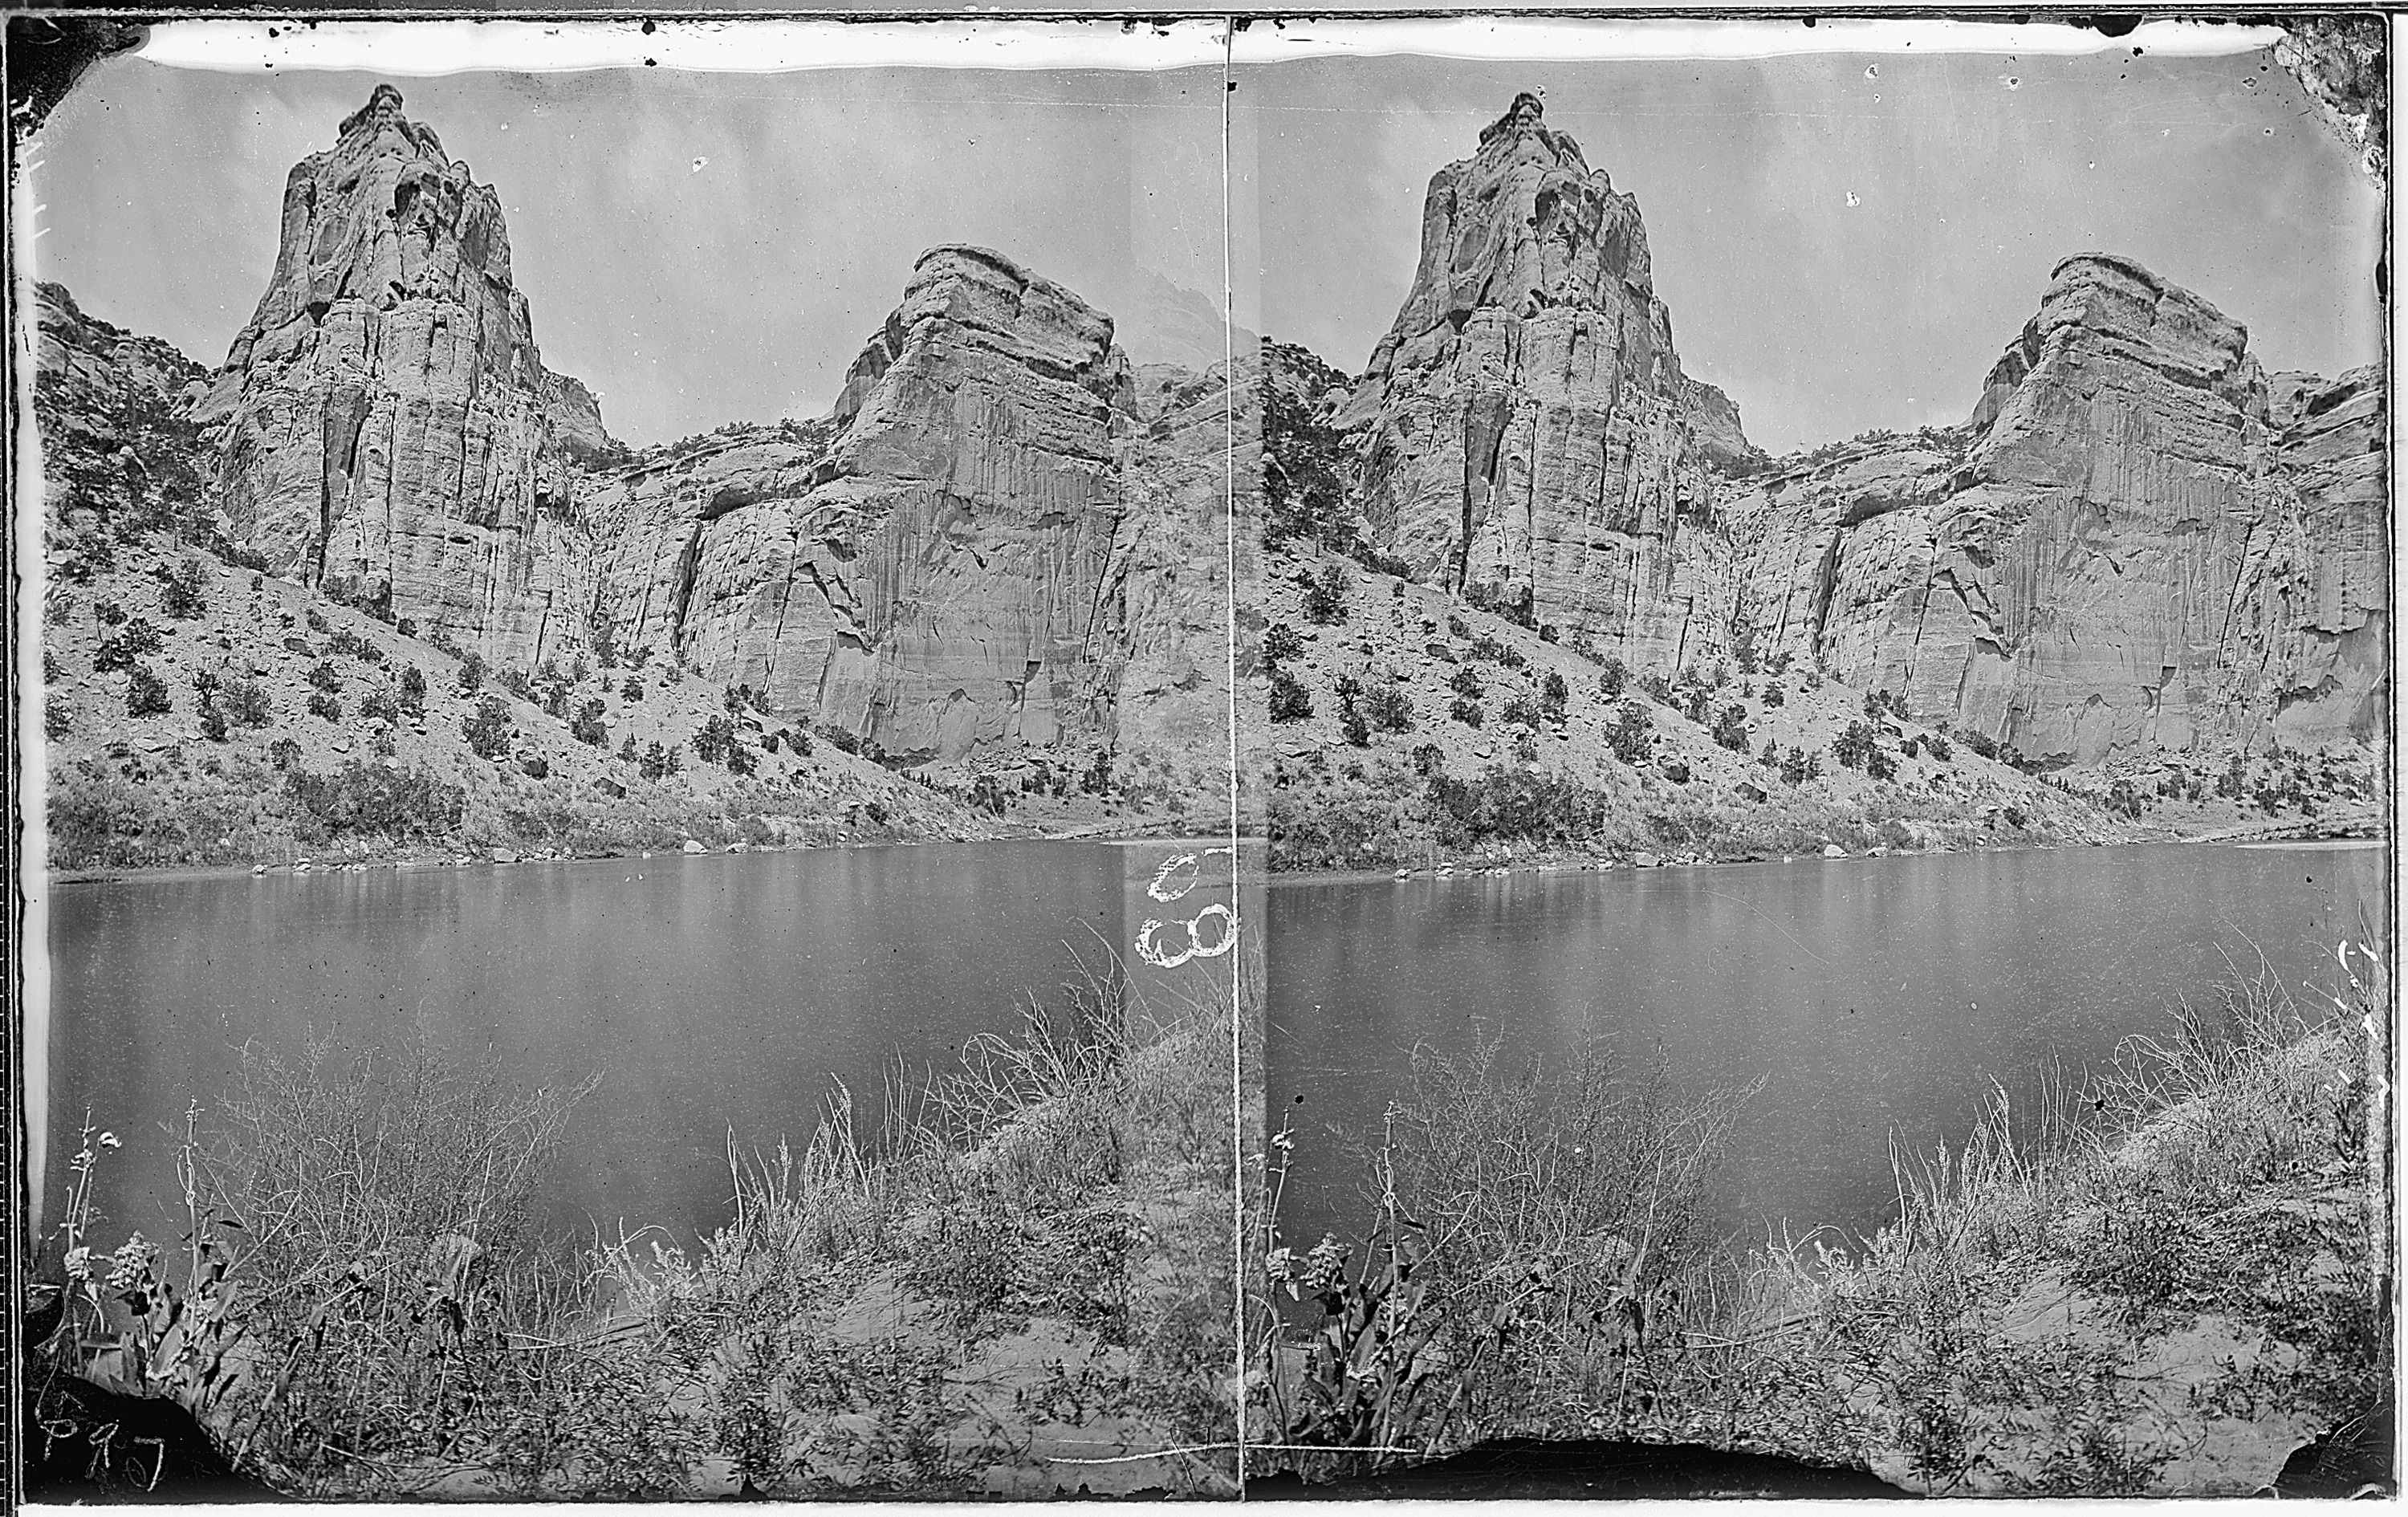 Green River. Stillwater Canyon, similar to 660, which is a close up of canyon wall. Old nos. 318, 377, 697. - NARA - 517923